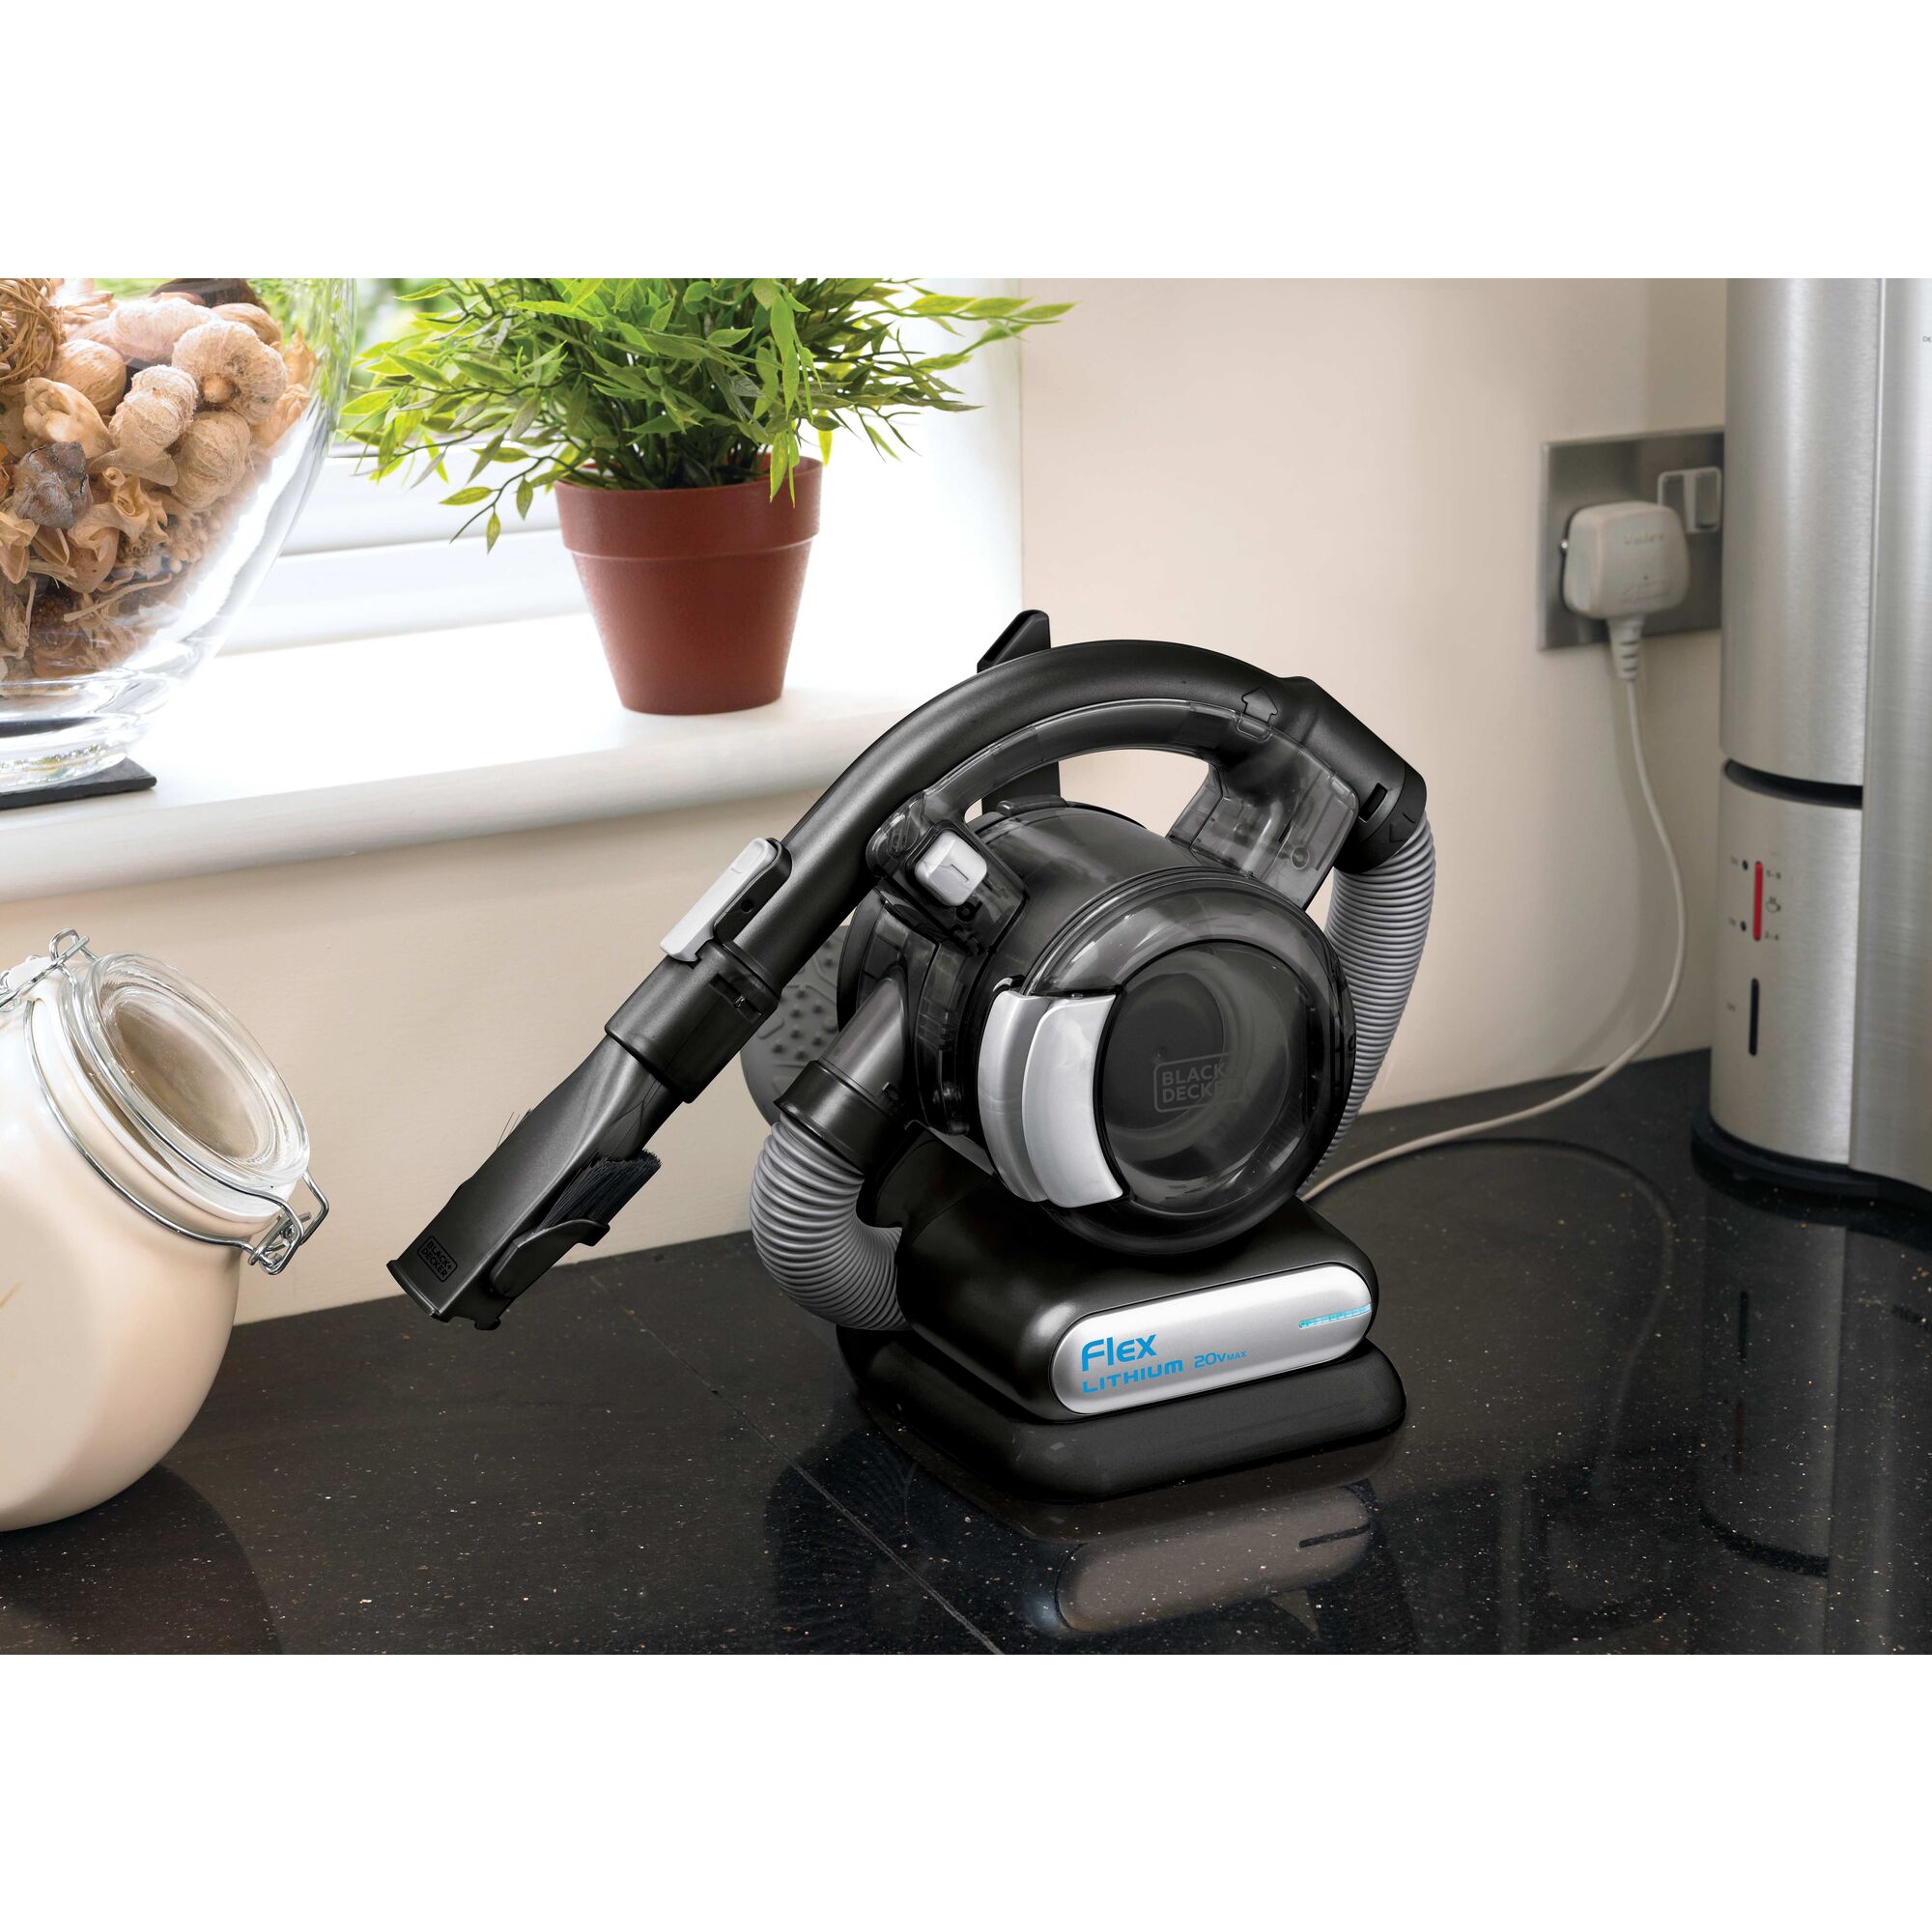 Quick charging feature of Dustbuster flex cordless hand vacuum with floor head plus pet hair brush.\r\n